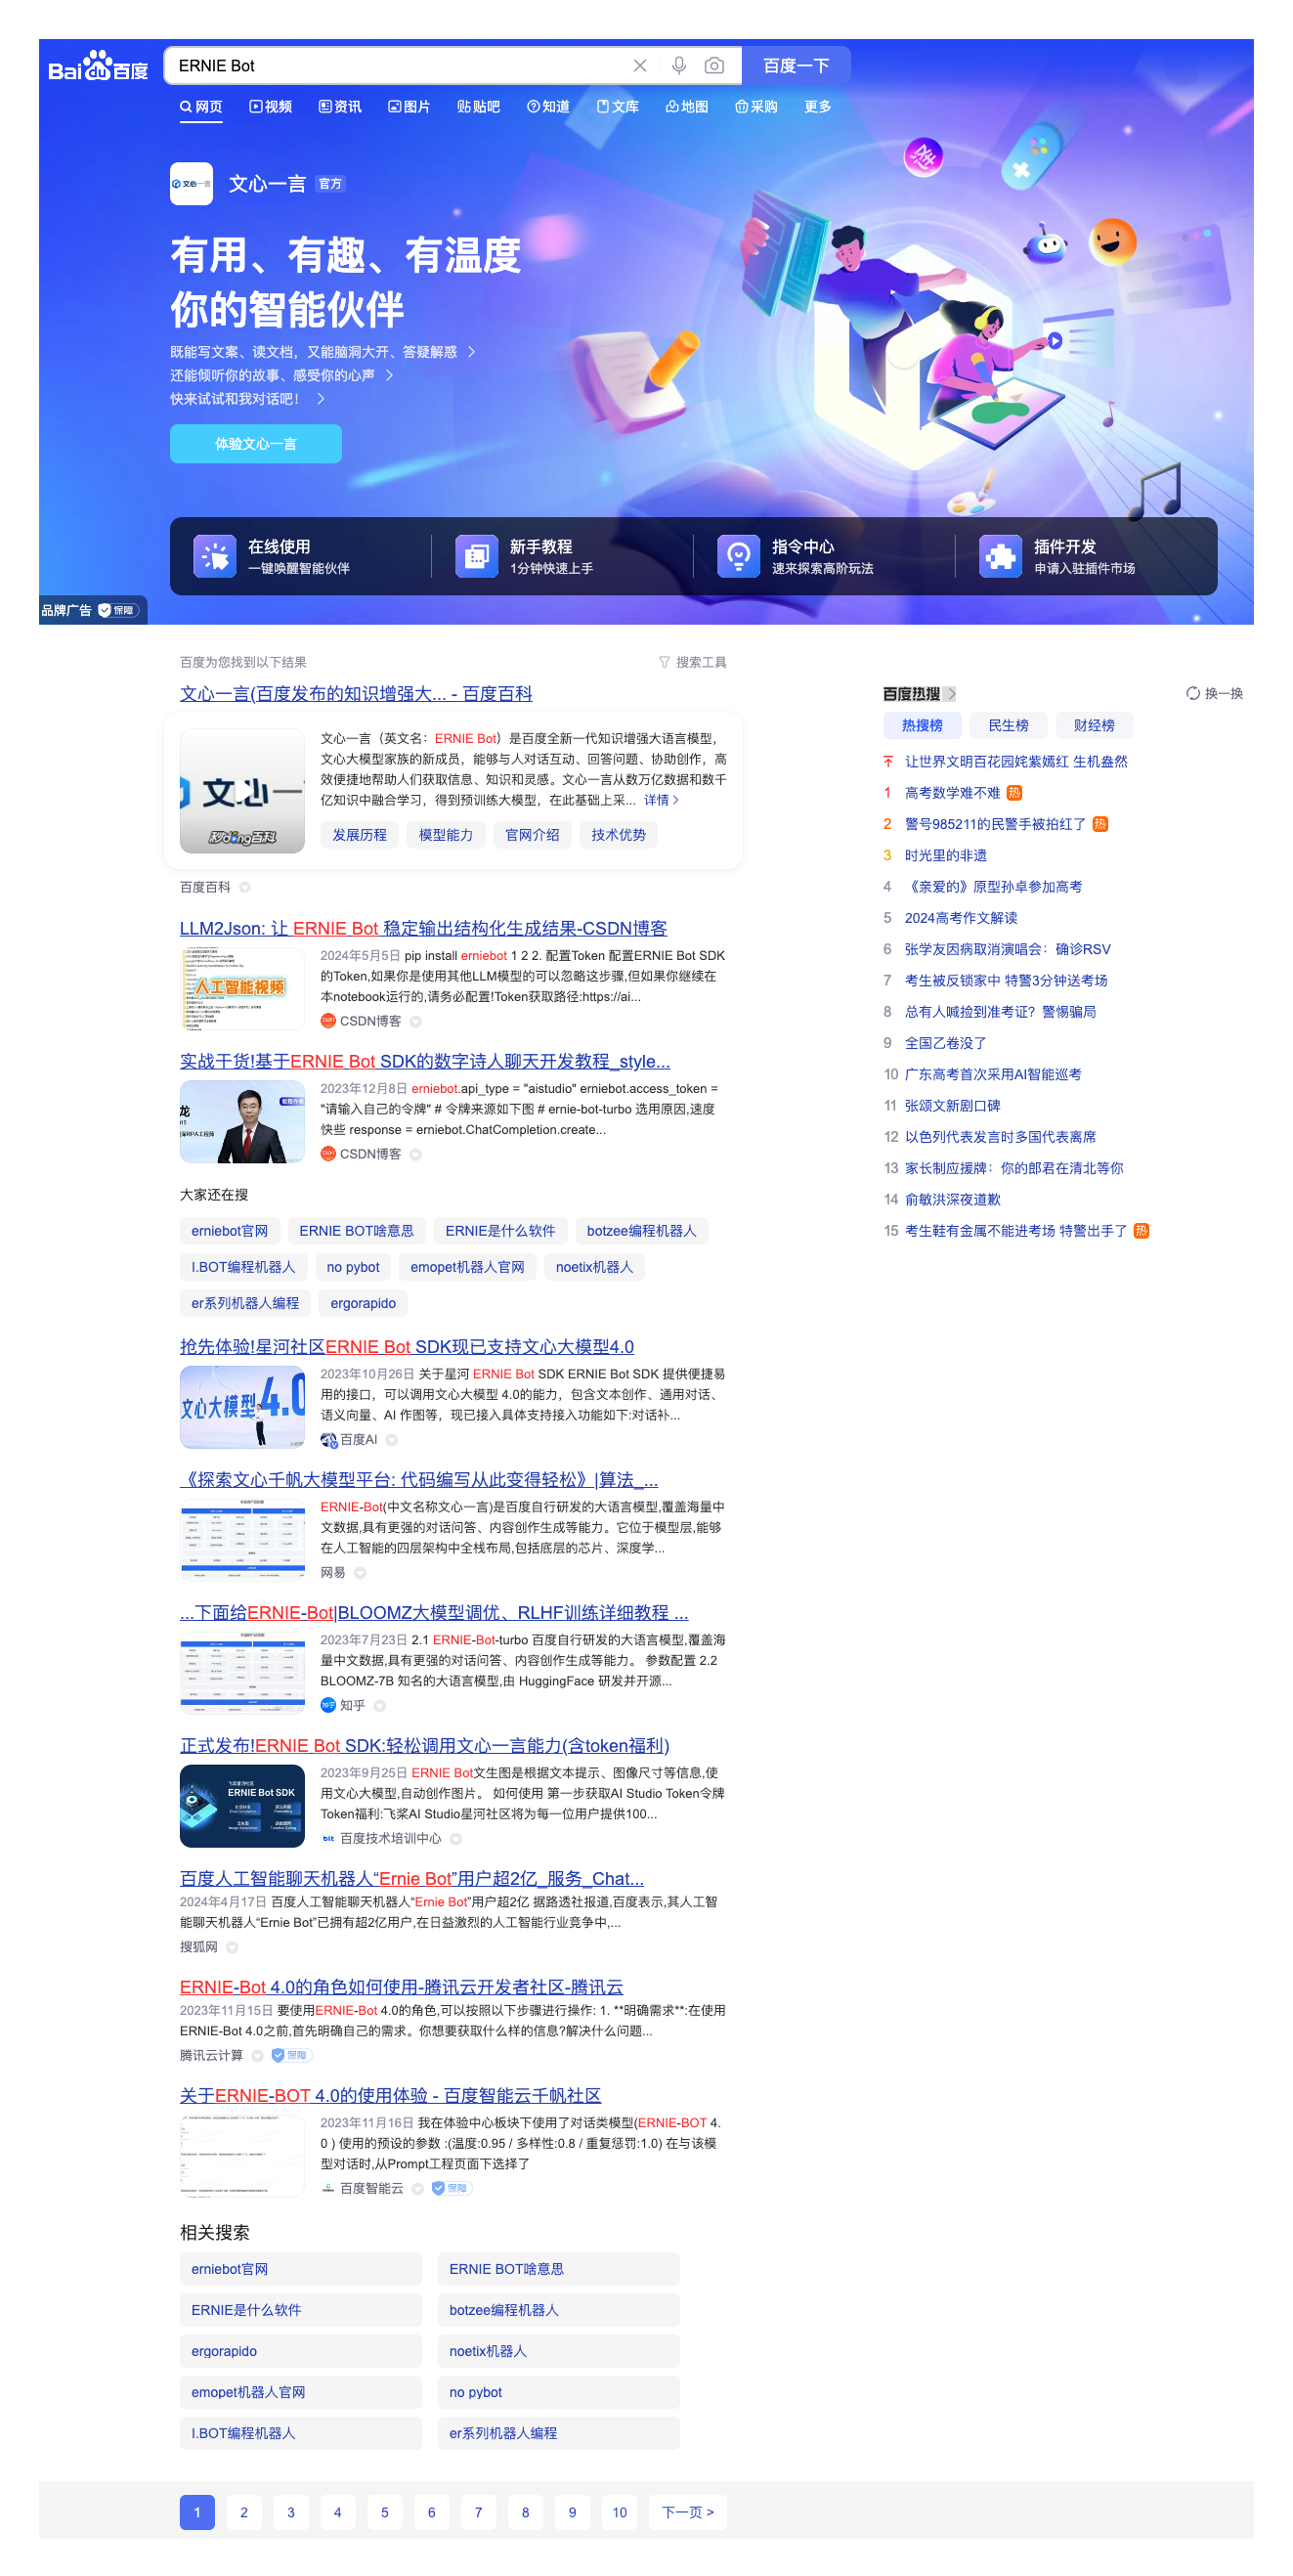 Extensive Baidu Search Results